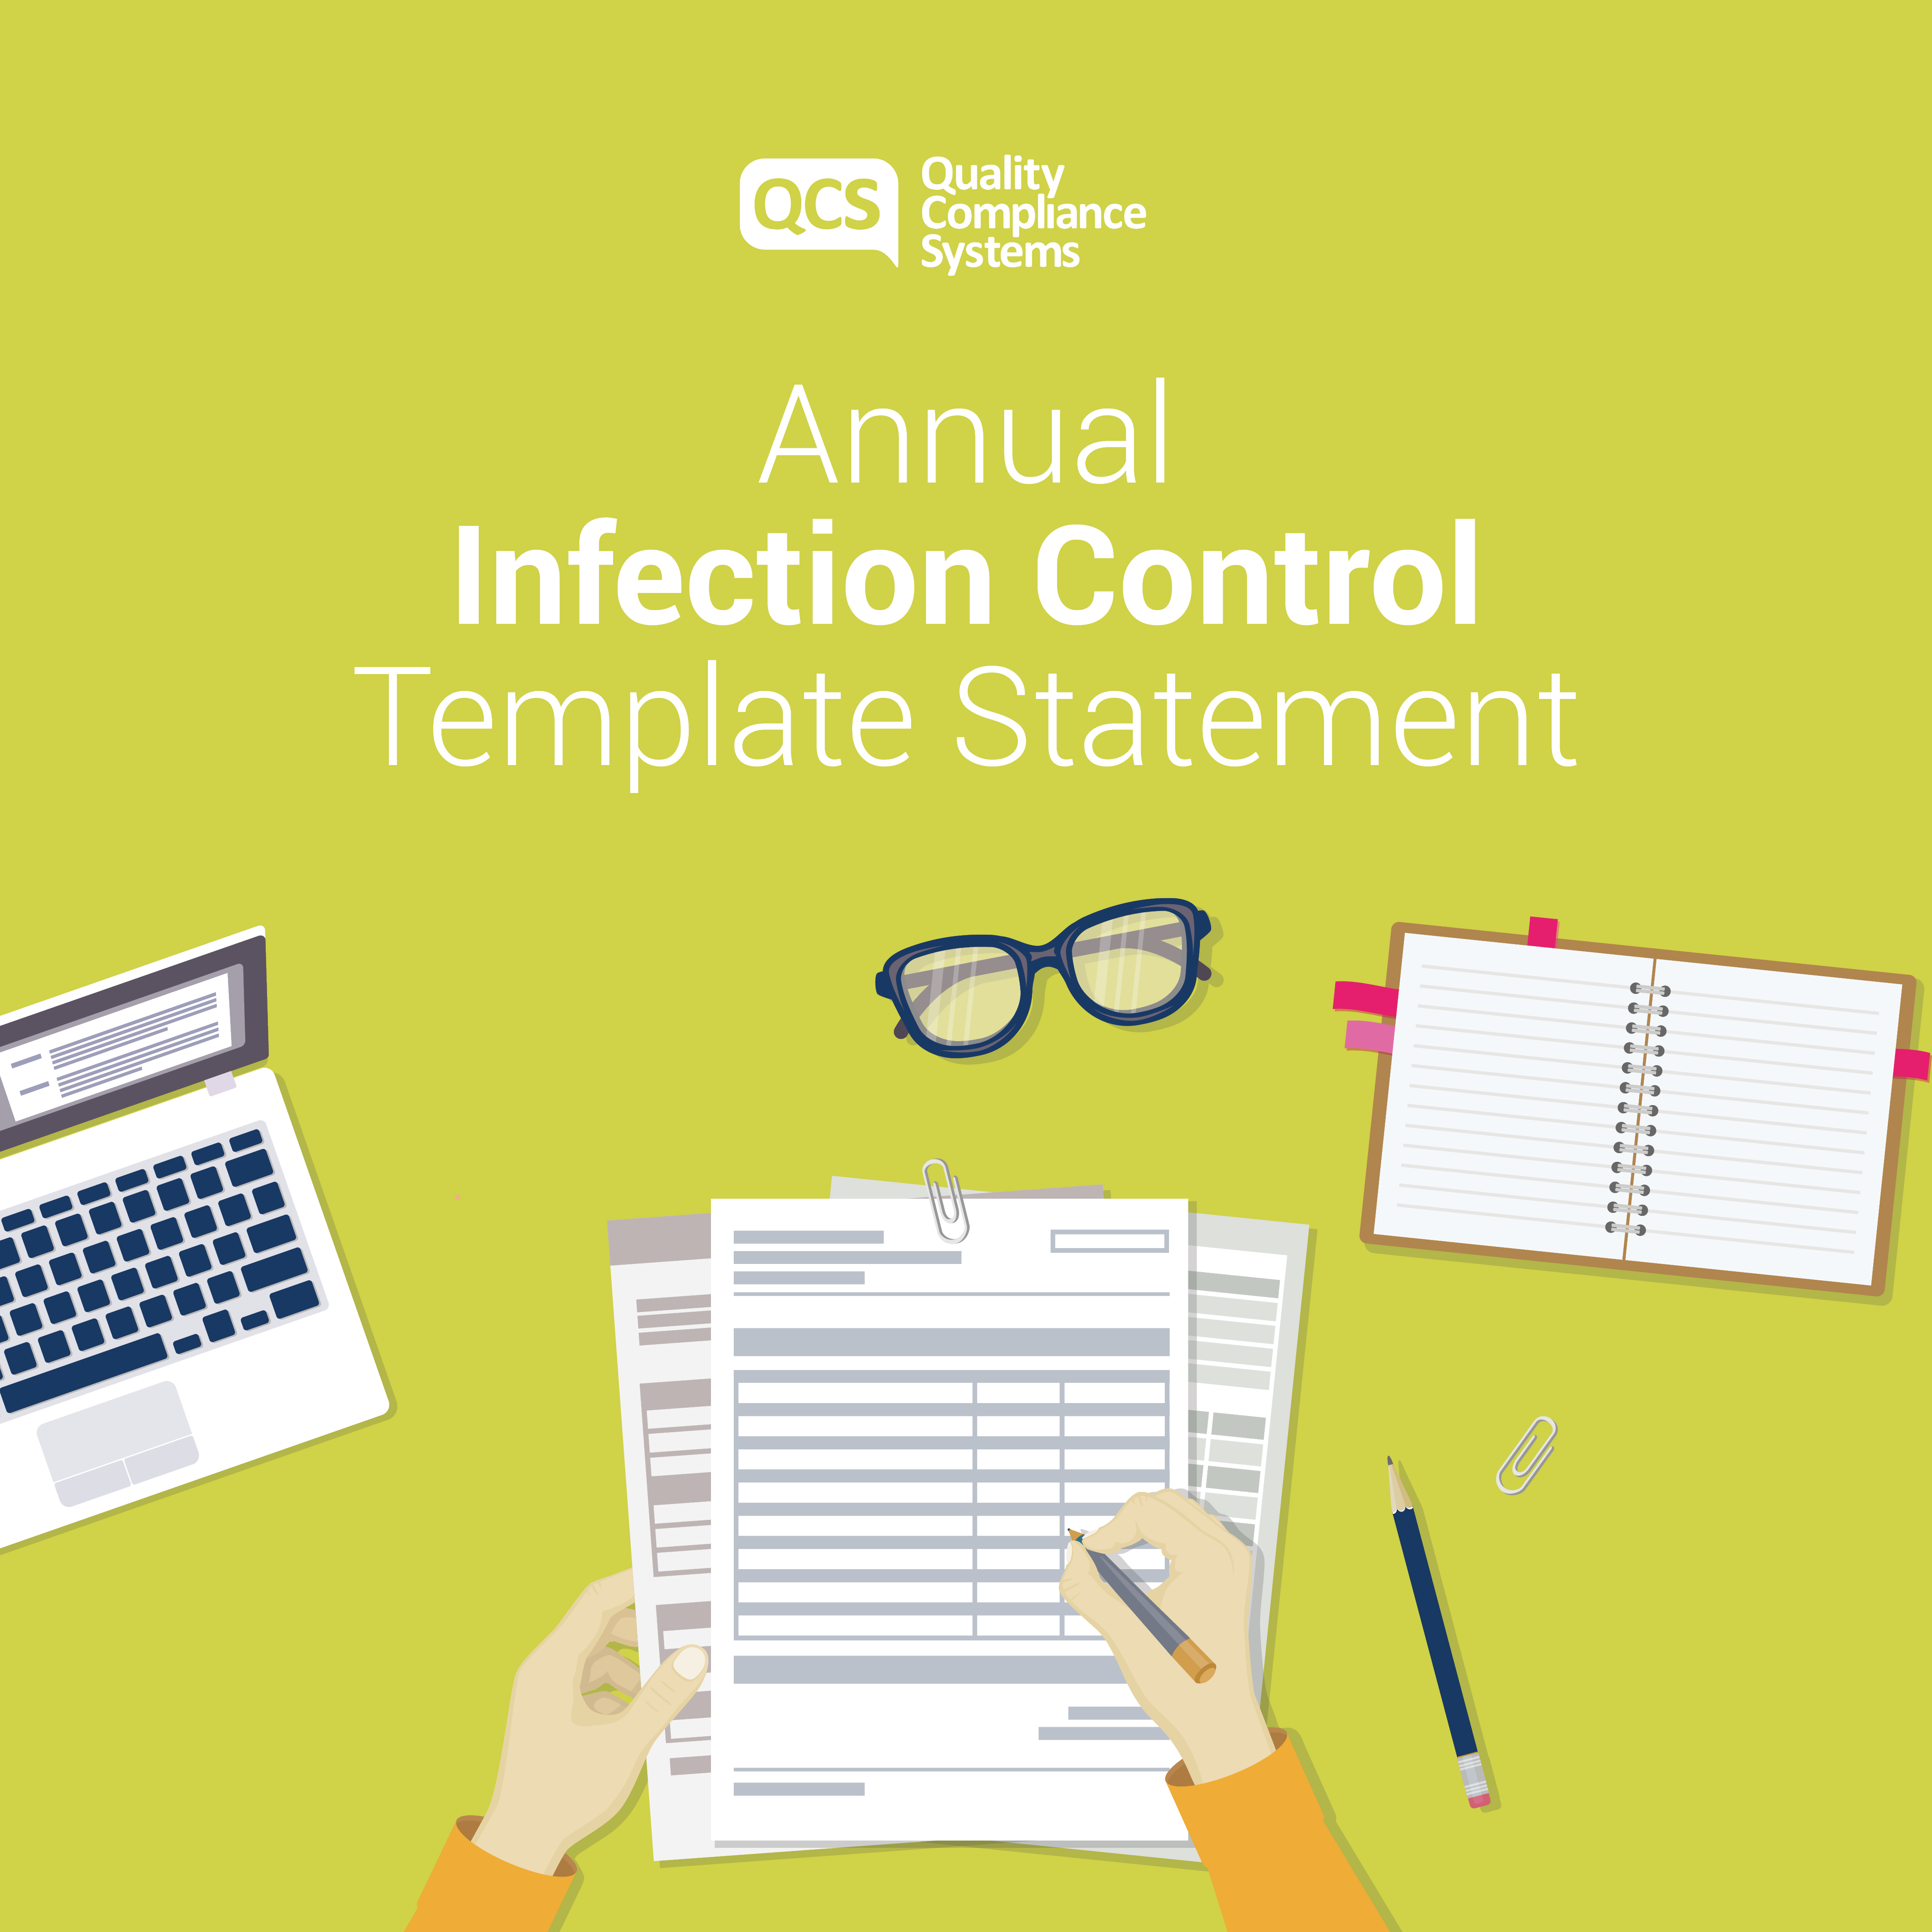 Download the Annual Infection Control Template Statement QCS